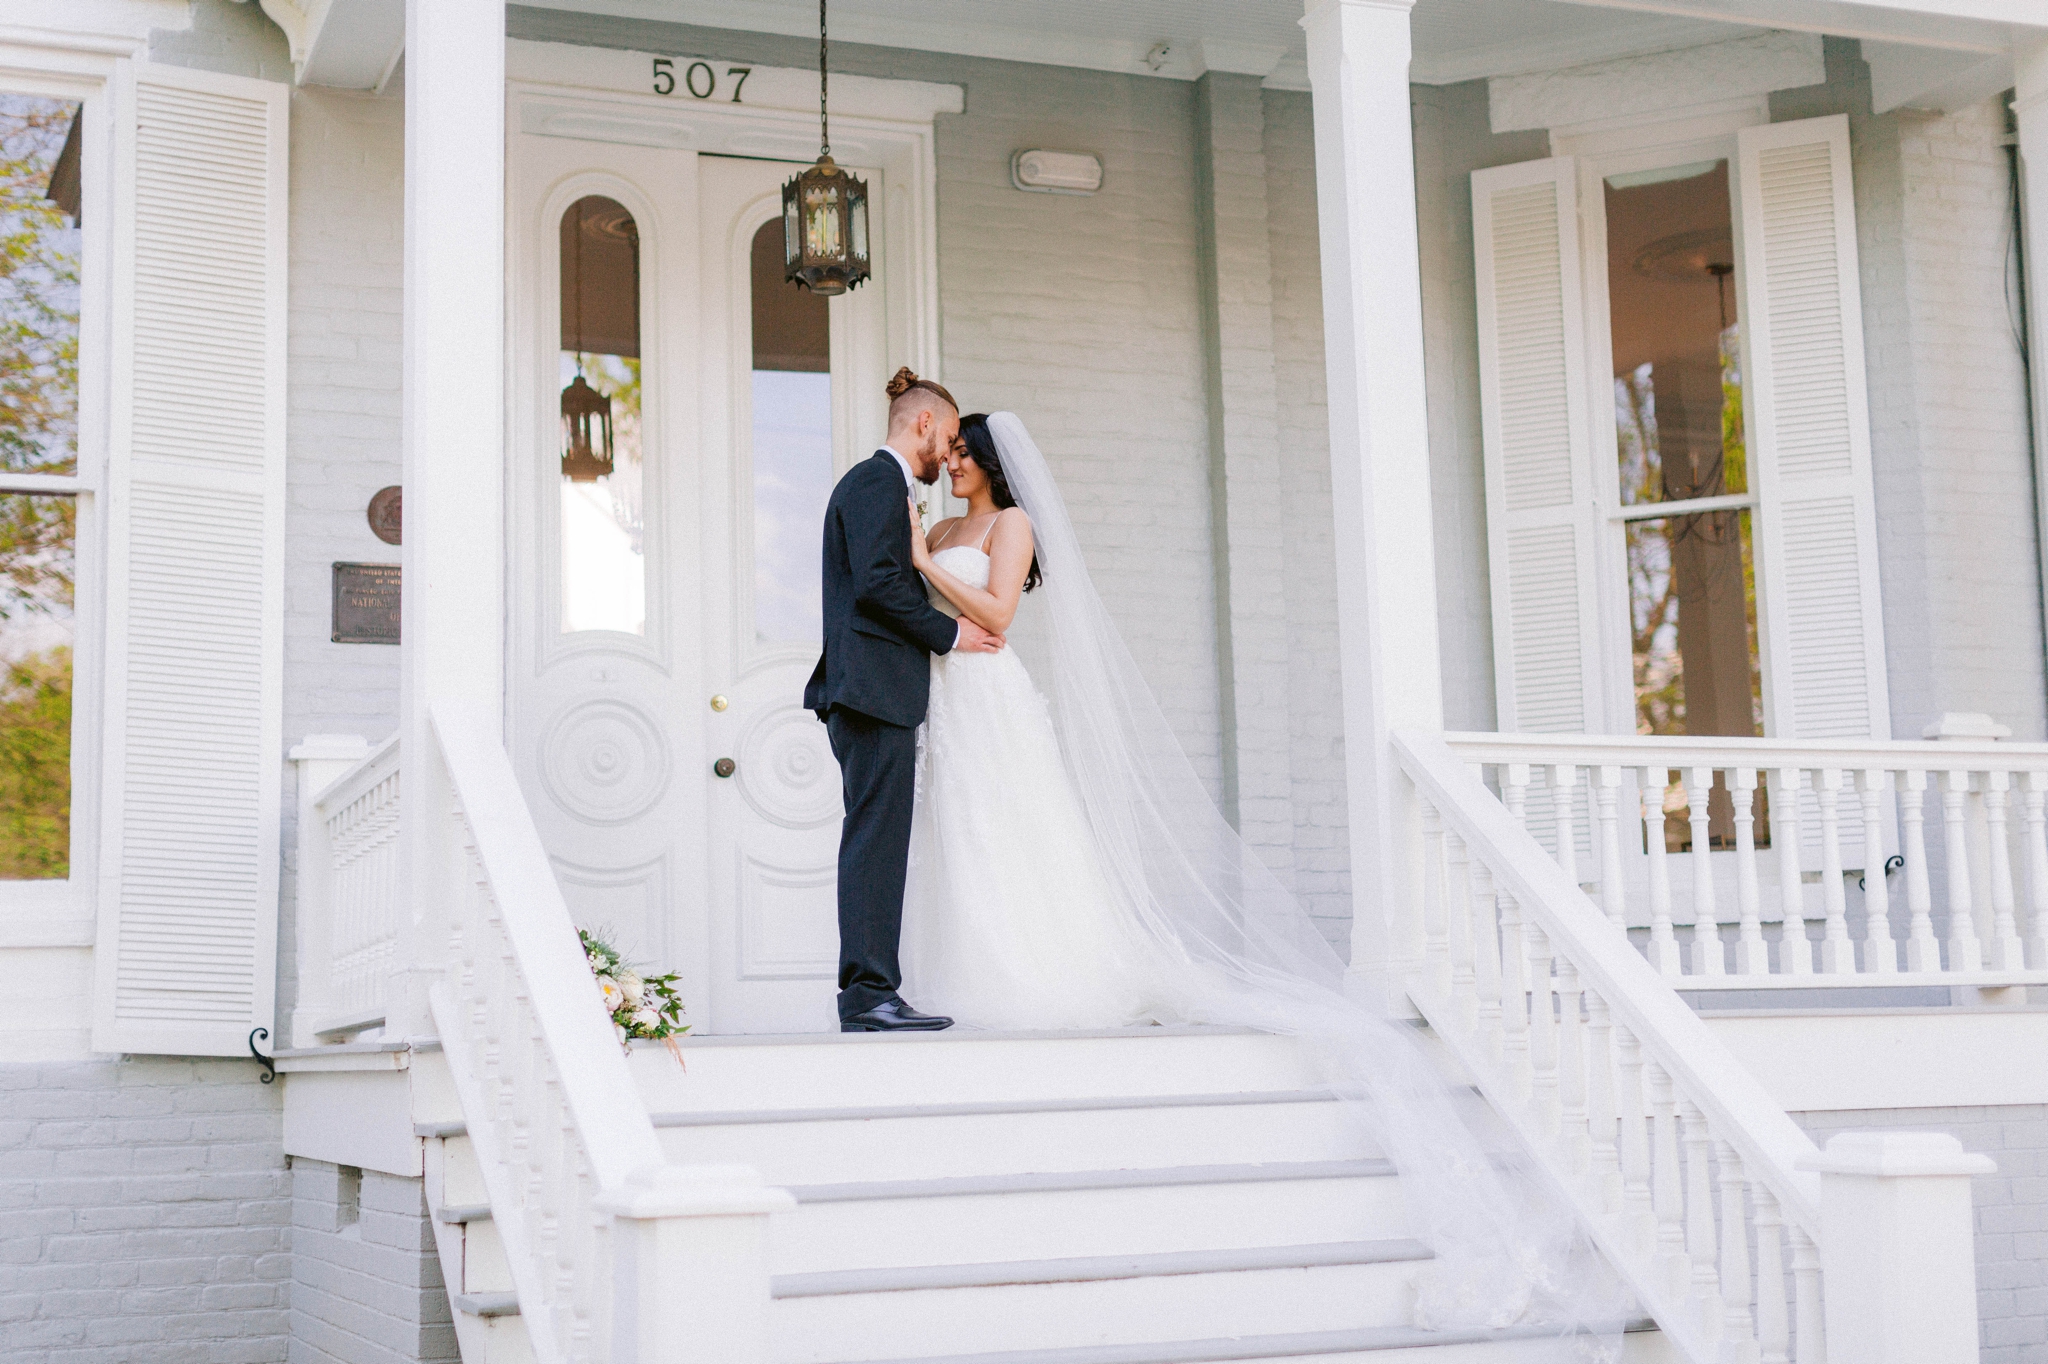  Couple Kissing - Wedding Portraits on the front porch of an all white luxury estate mansion - Bride is wearing a Aline Ballgown by Cherish by Southern Bride with a long cathedral veil - Groom is wearing a black suit by Generation Tux and has a man b